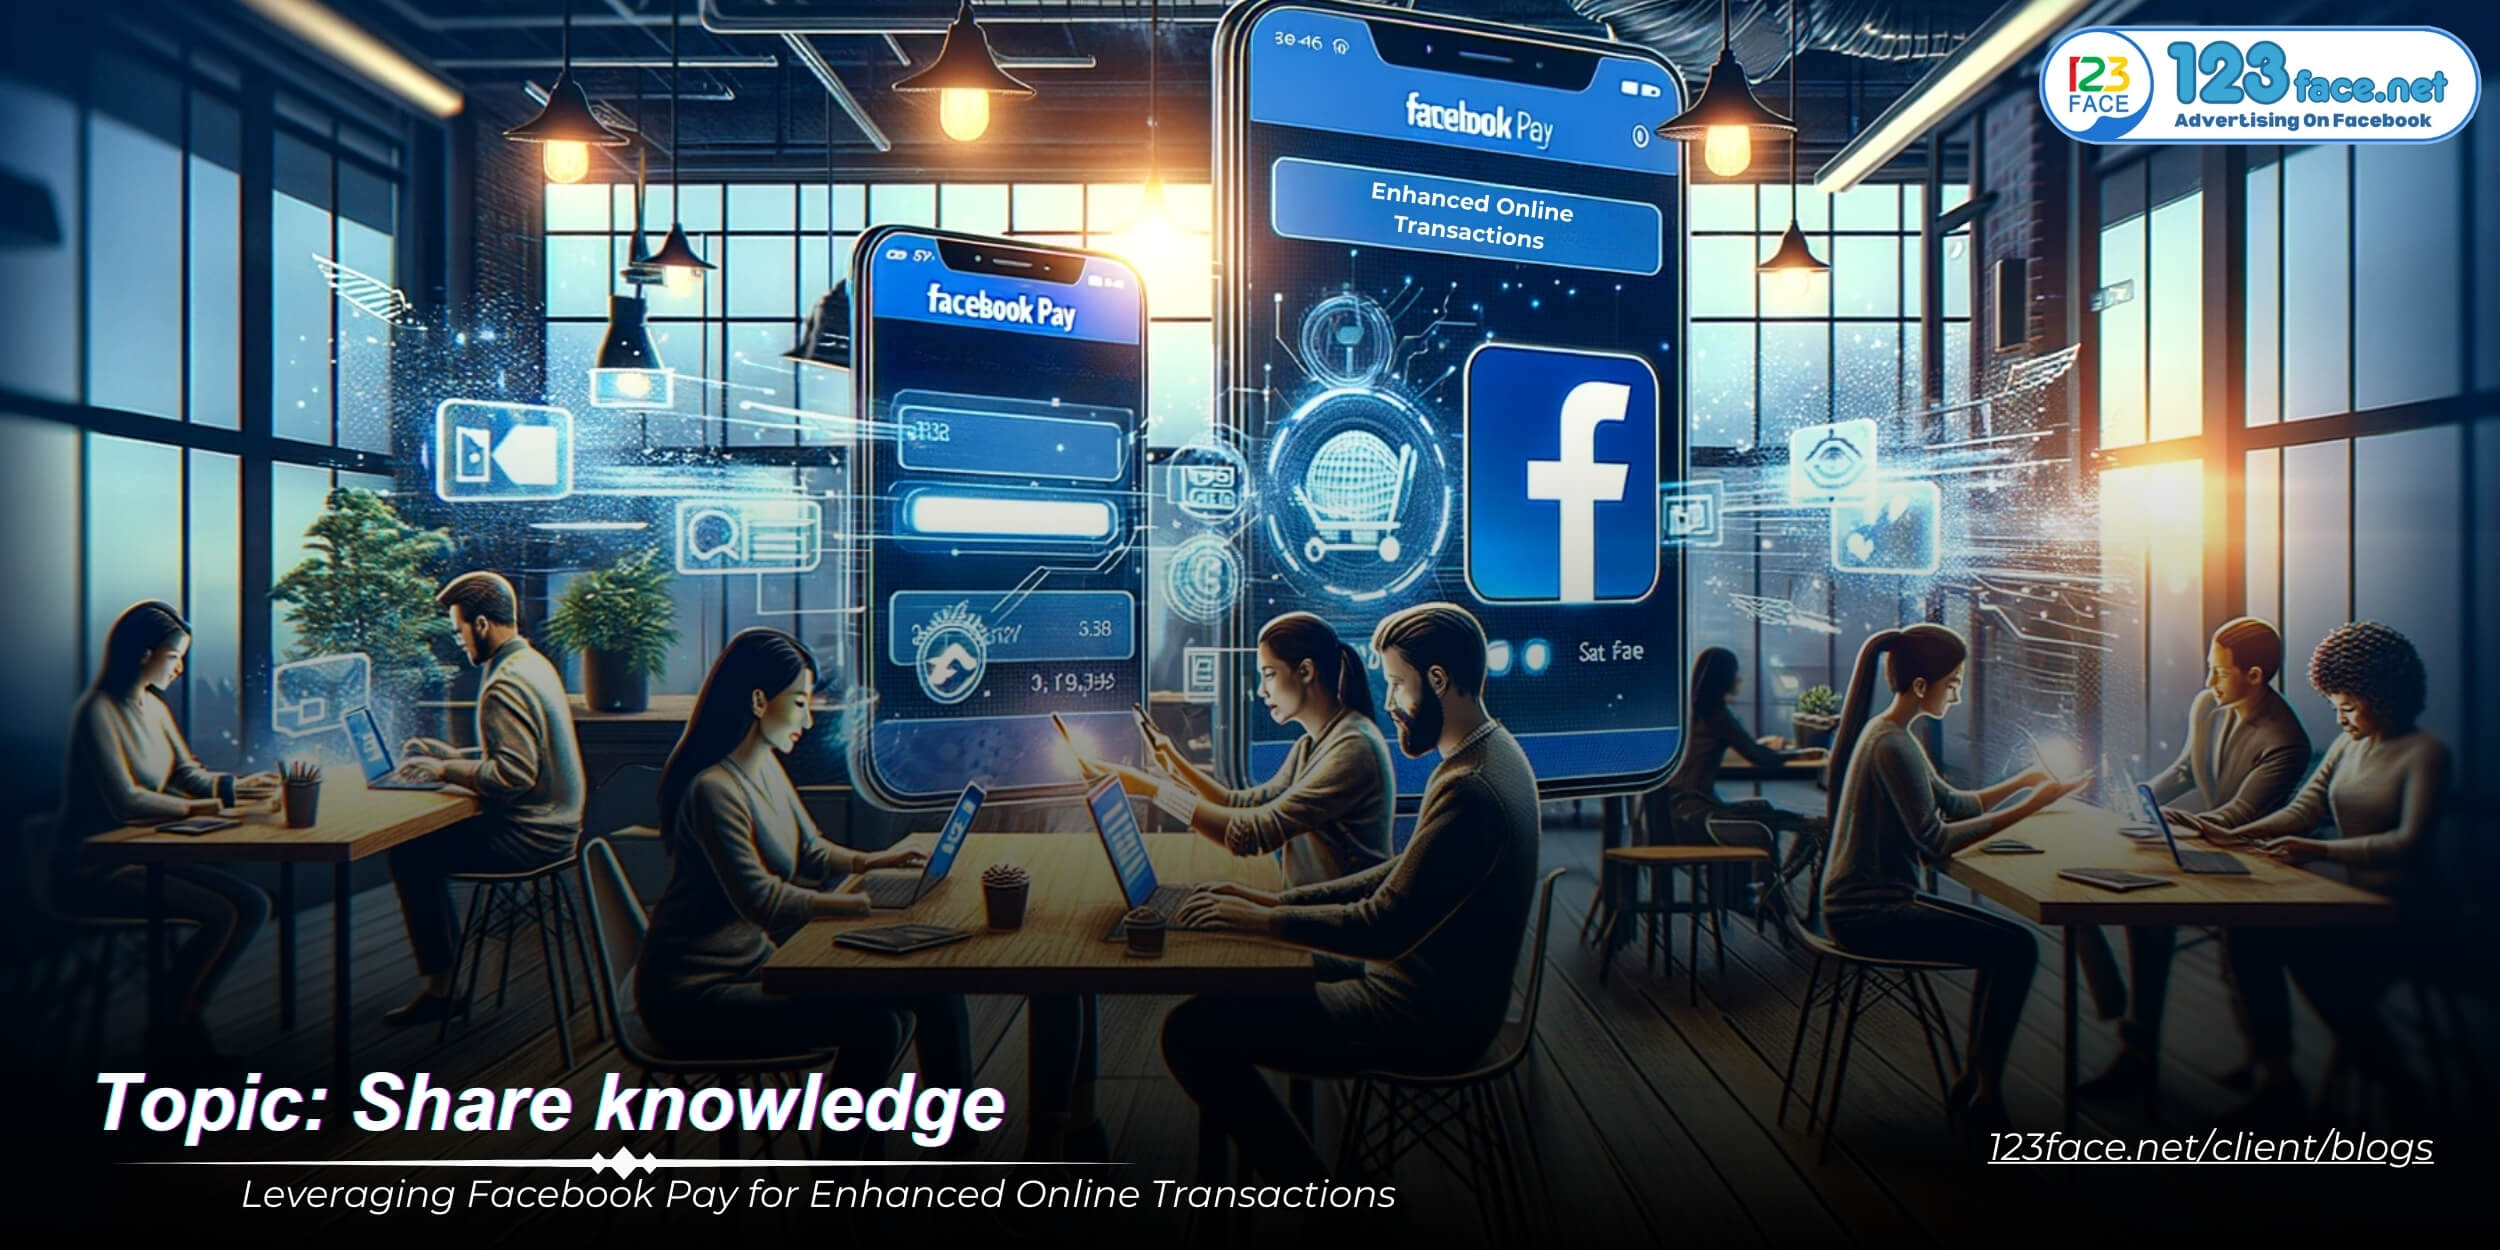 Leveraging Facebook Pay for Enhanced Online Transactions